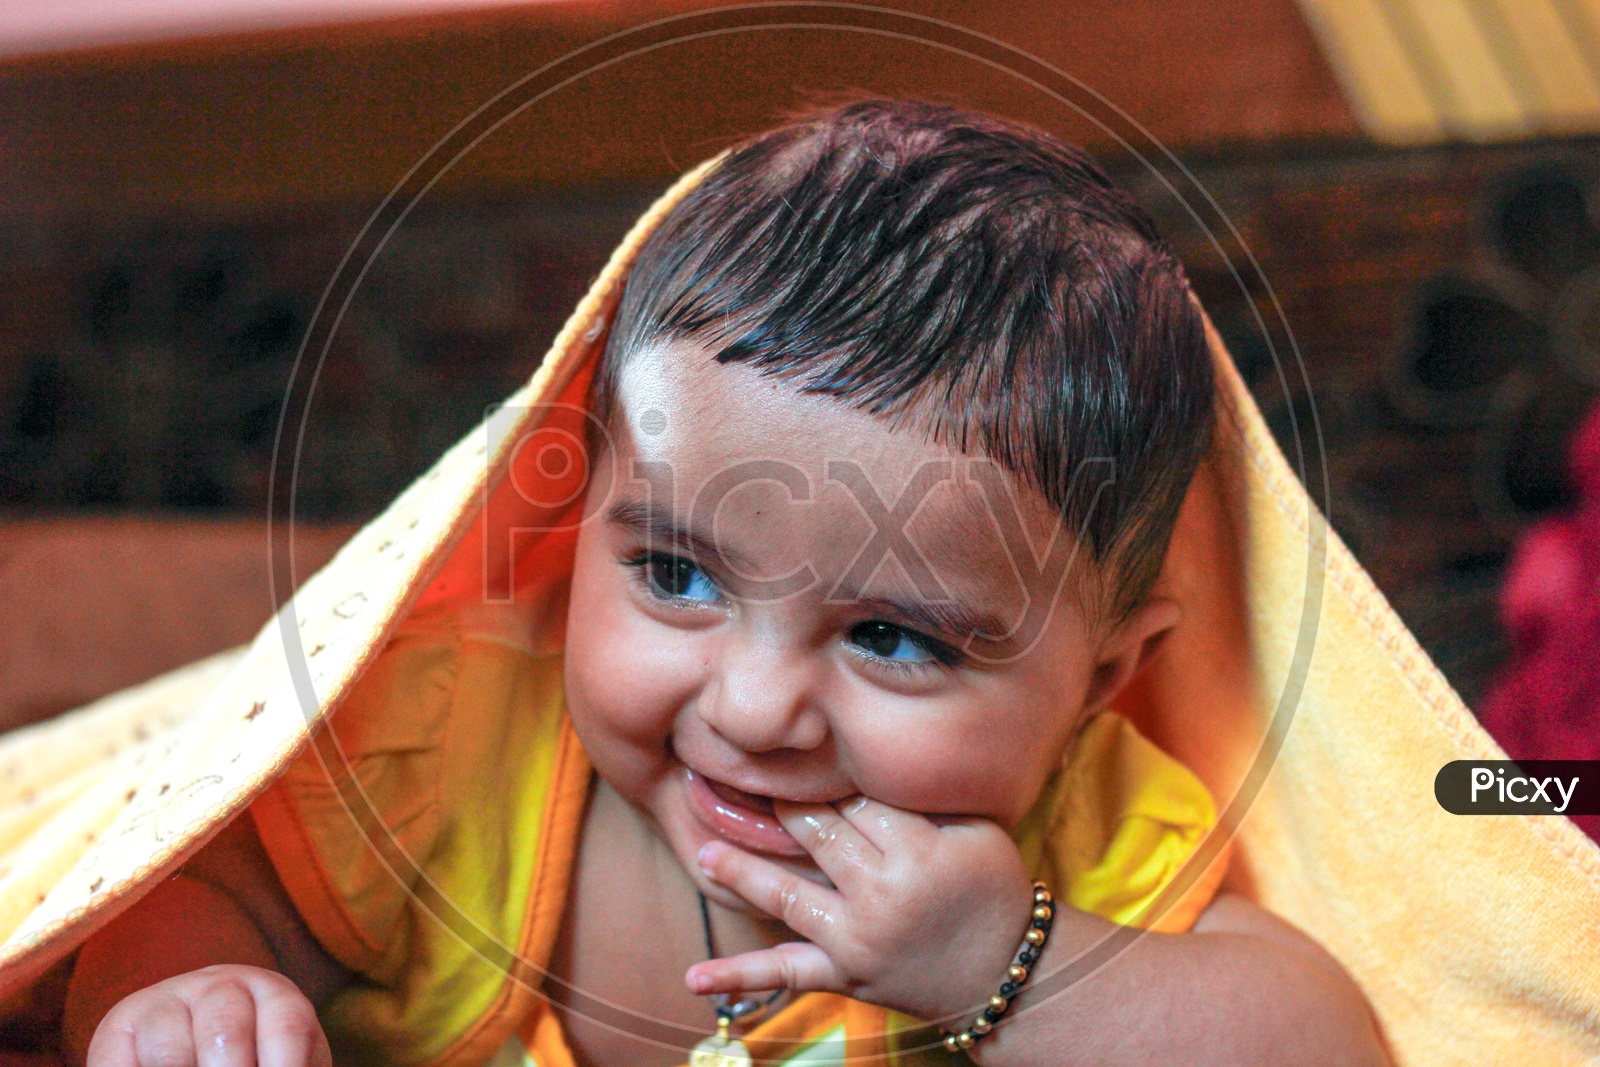 Indian Cute Baby Closeup Shots With Expressions Lying on a Bed in Home